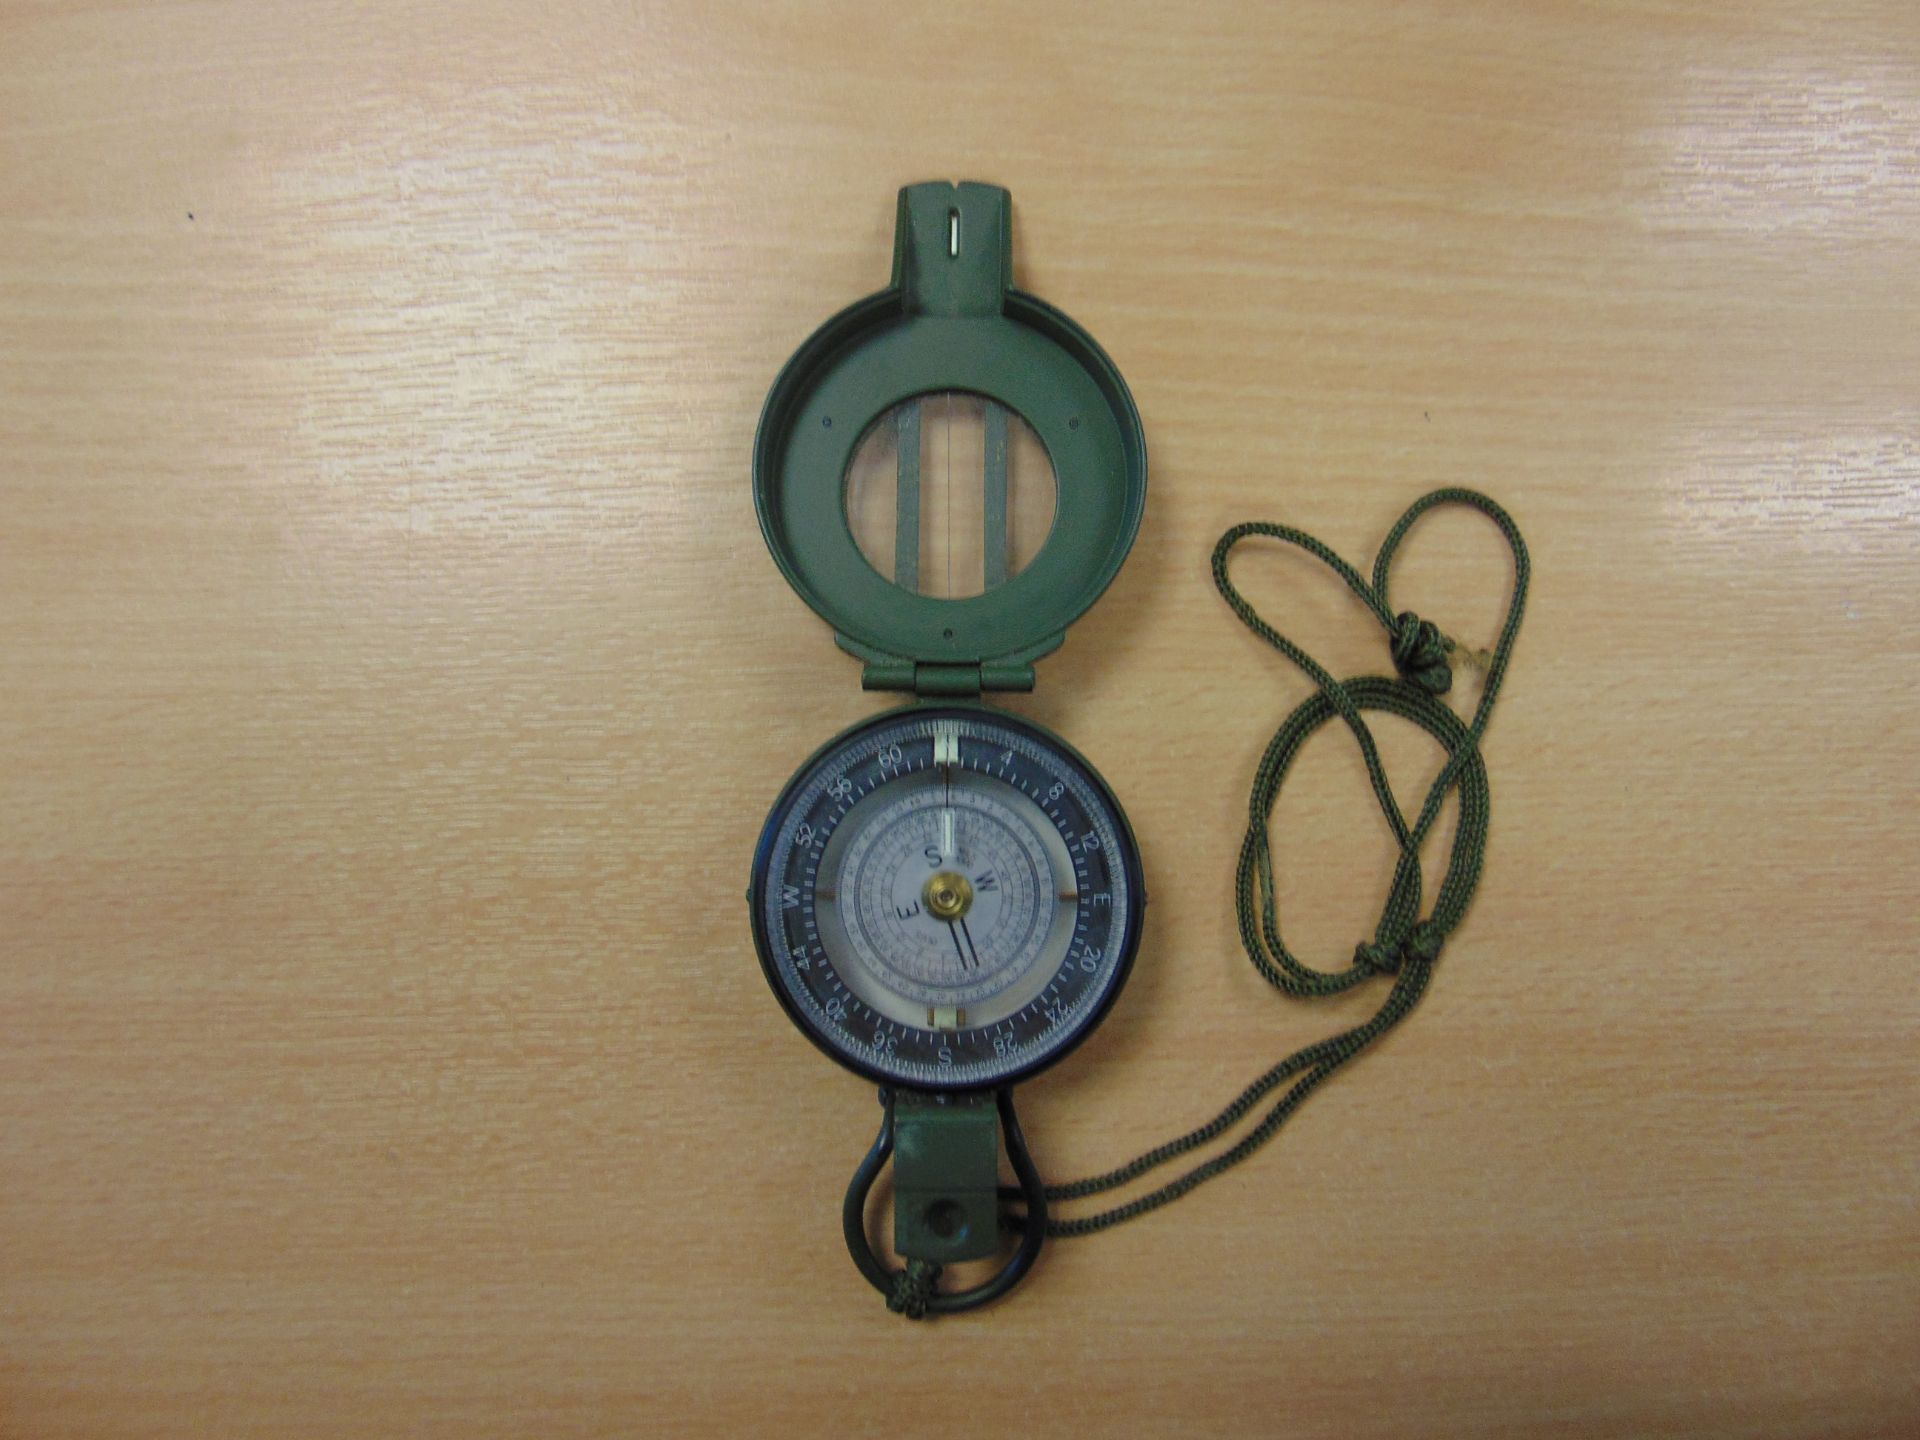 Francis Barker M88 British Army Prismatic Compass in Mils - Image 3 of 10